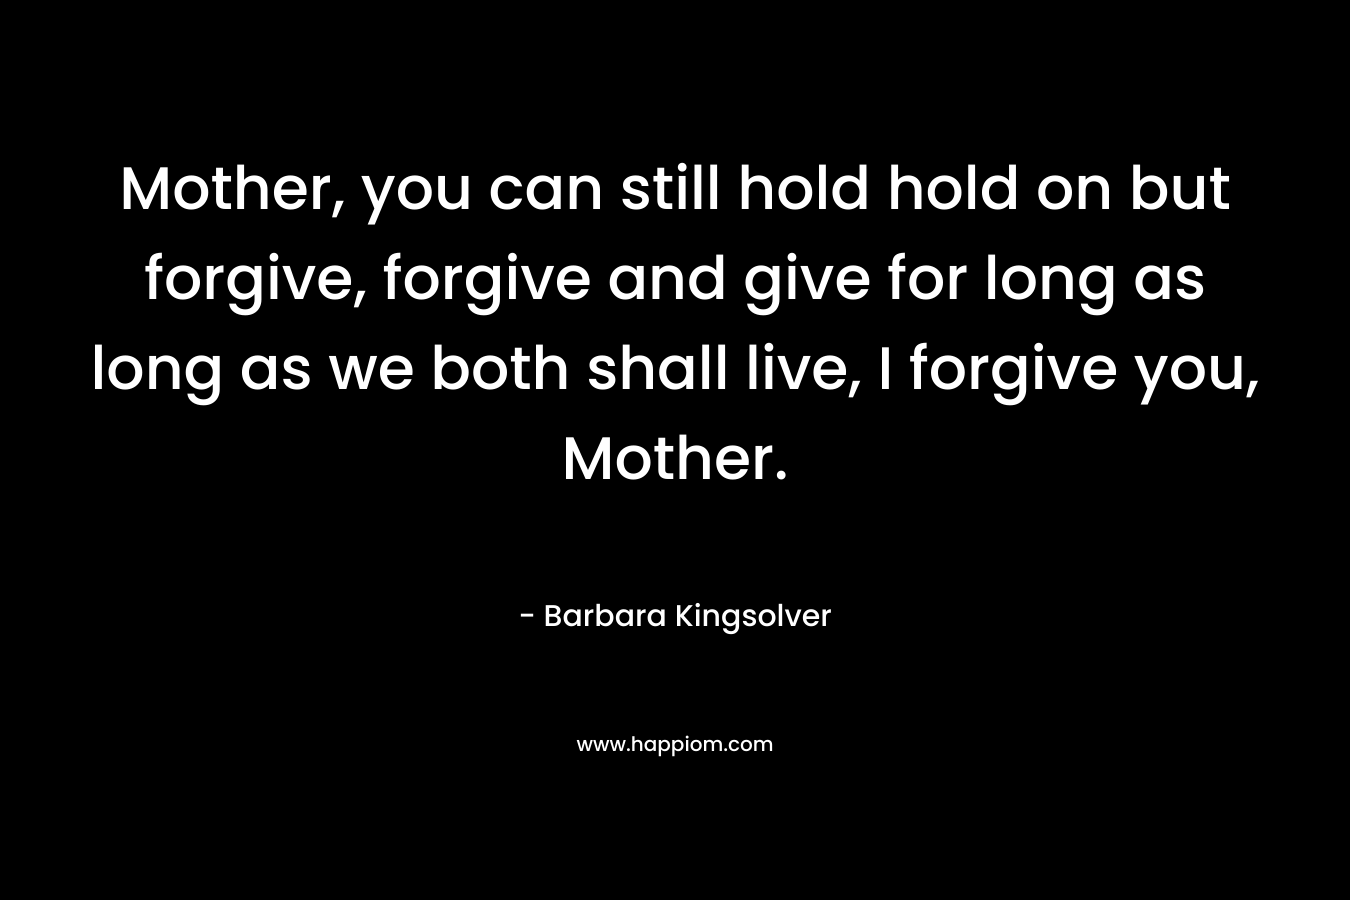 Mother, you can still hold hold on but forgive, forgive and give for long as long as we both shall live, I forgive you, Mother.